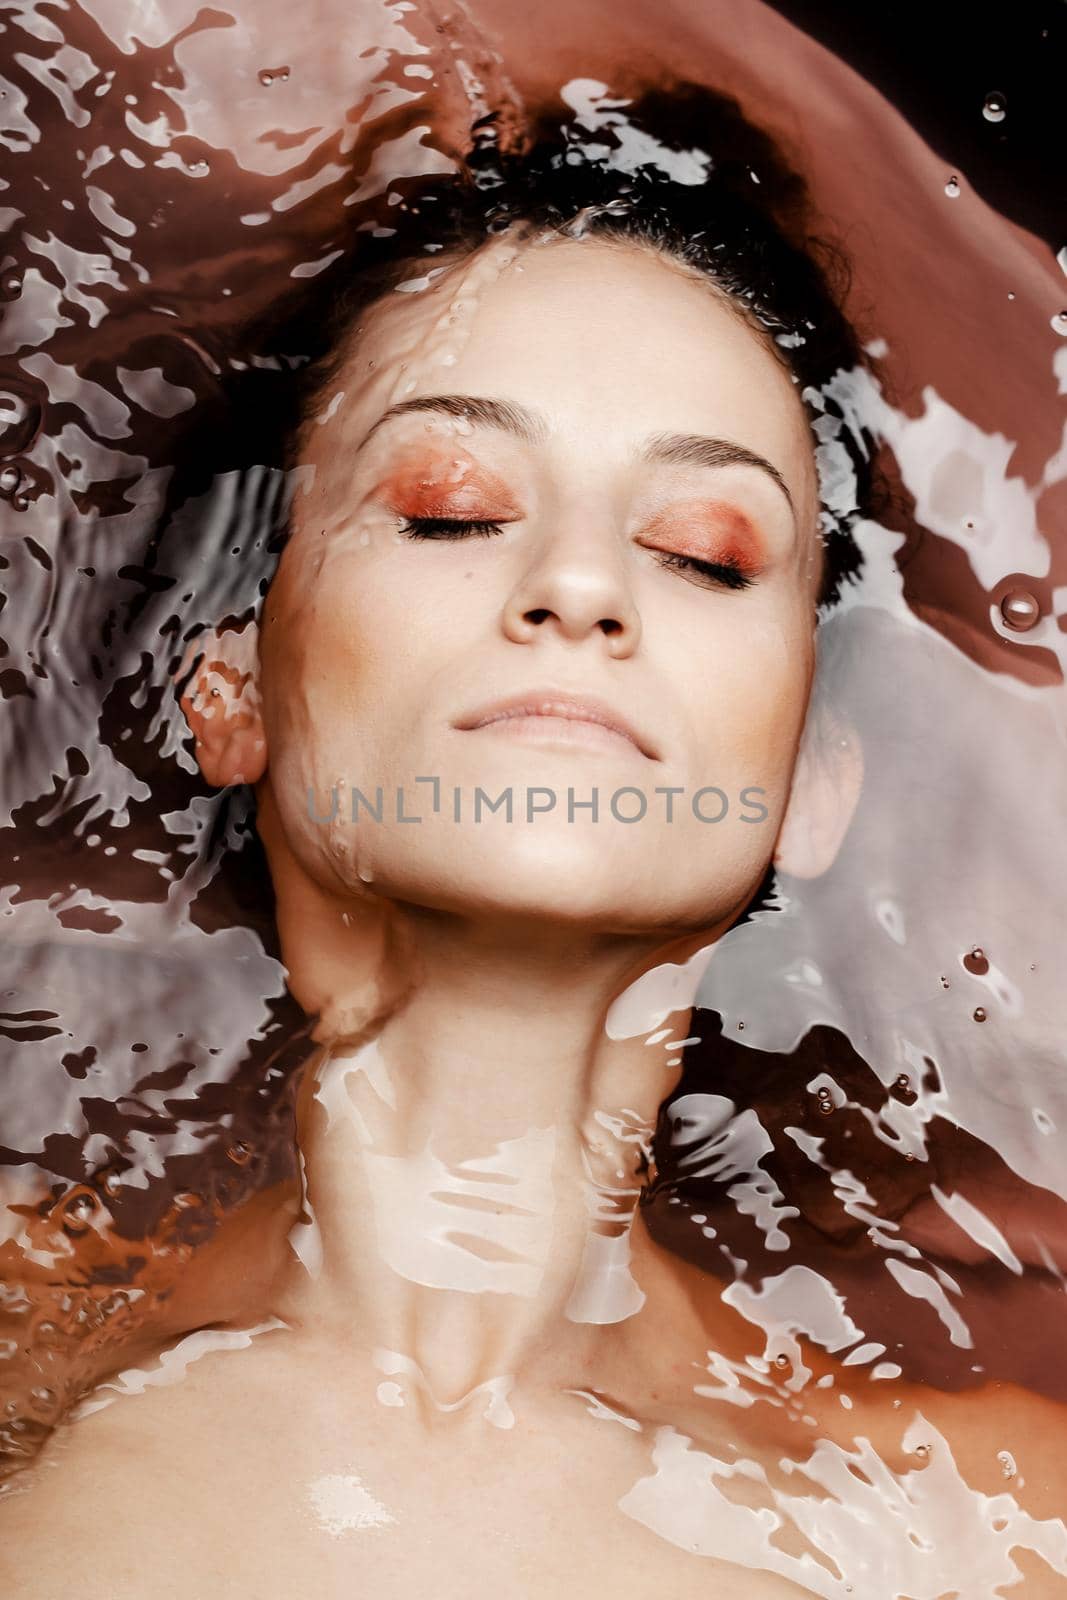 Underwater beauty portrait of a beautiful caucasian girl. Eyes closed. Red colored water.. by kokimk